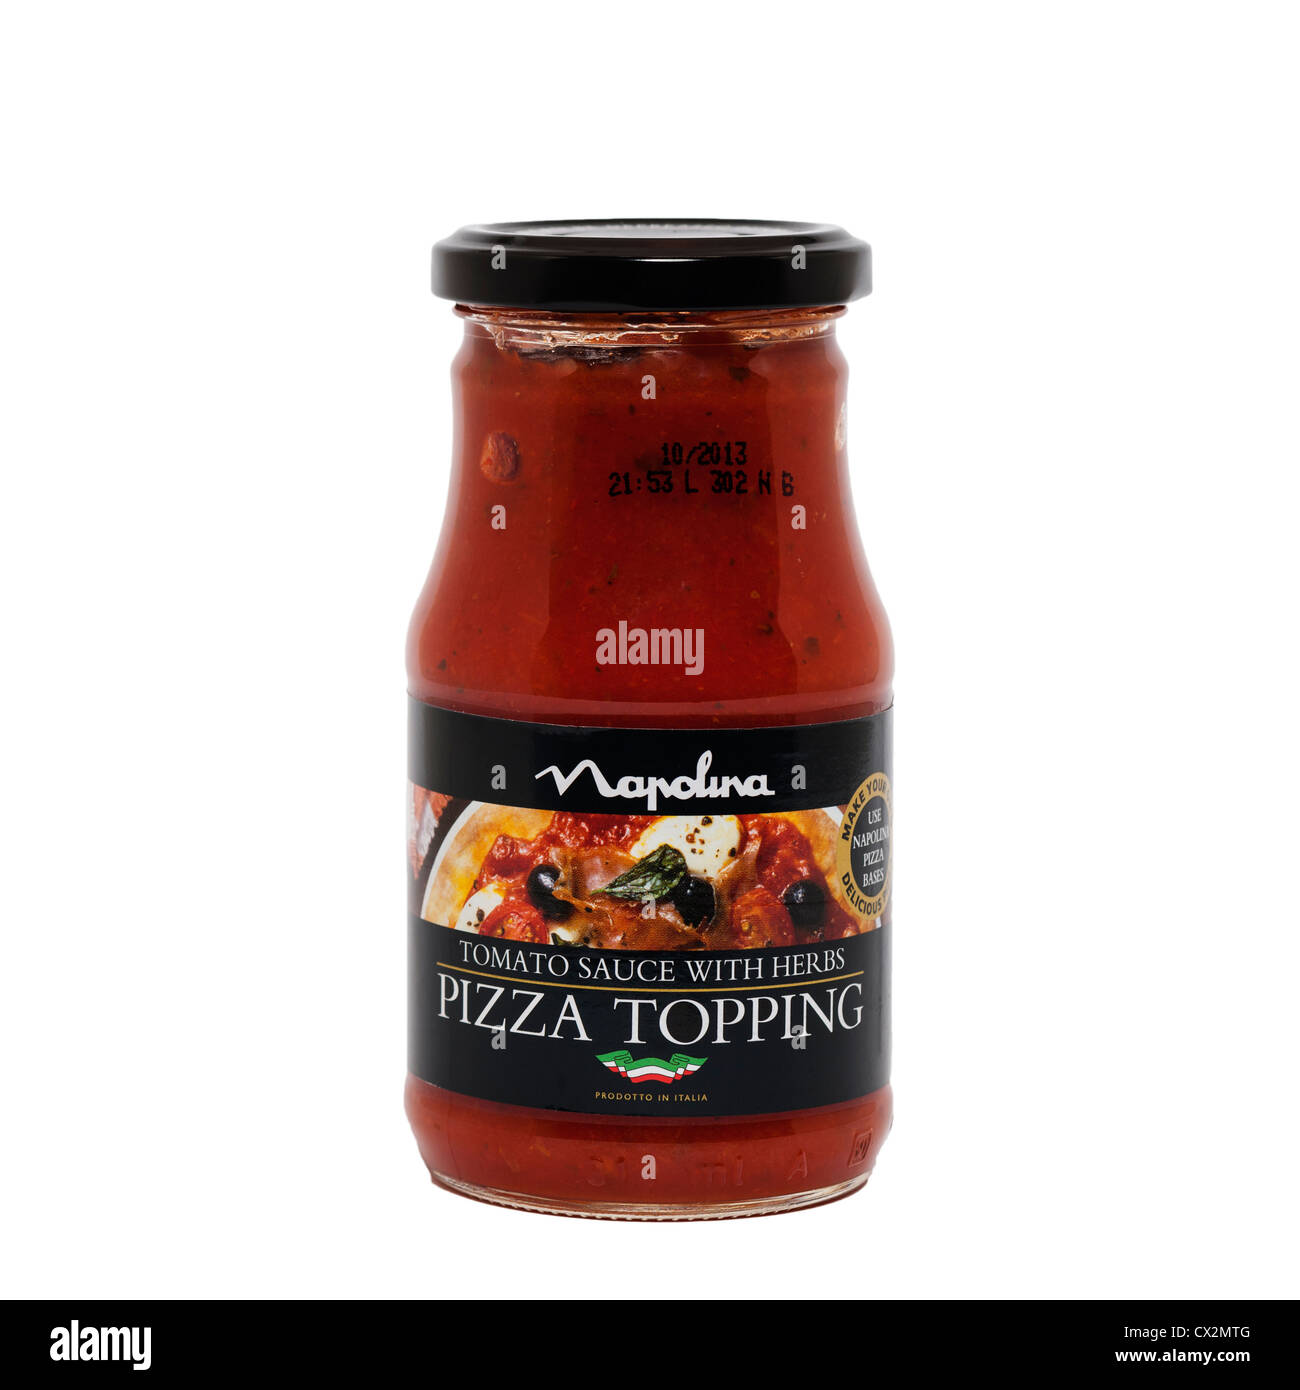 A jar of napolina tomato sauce with herbs pizza topping on a white background Stock Photo